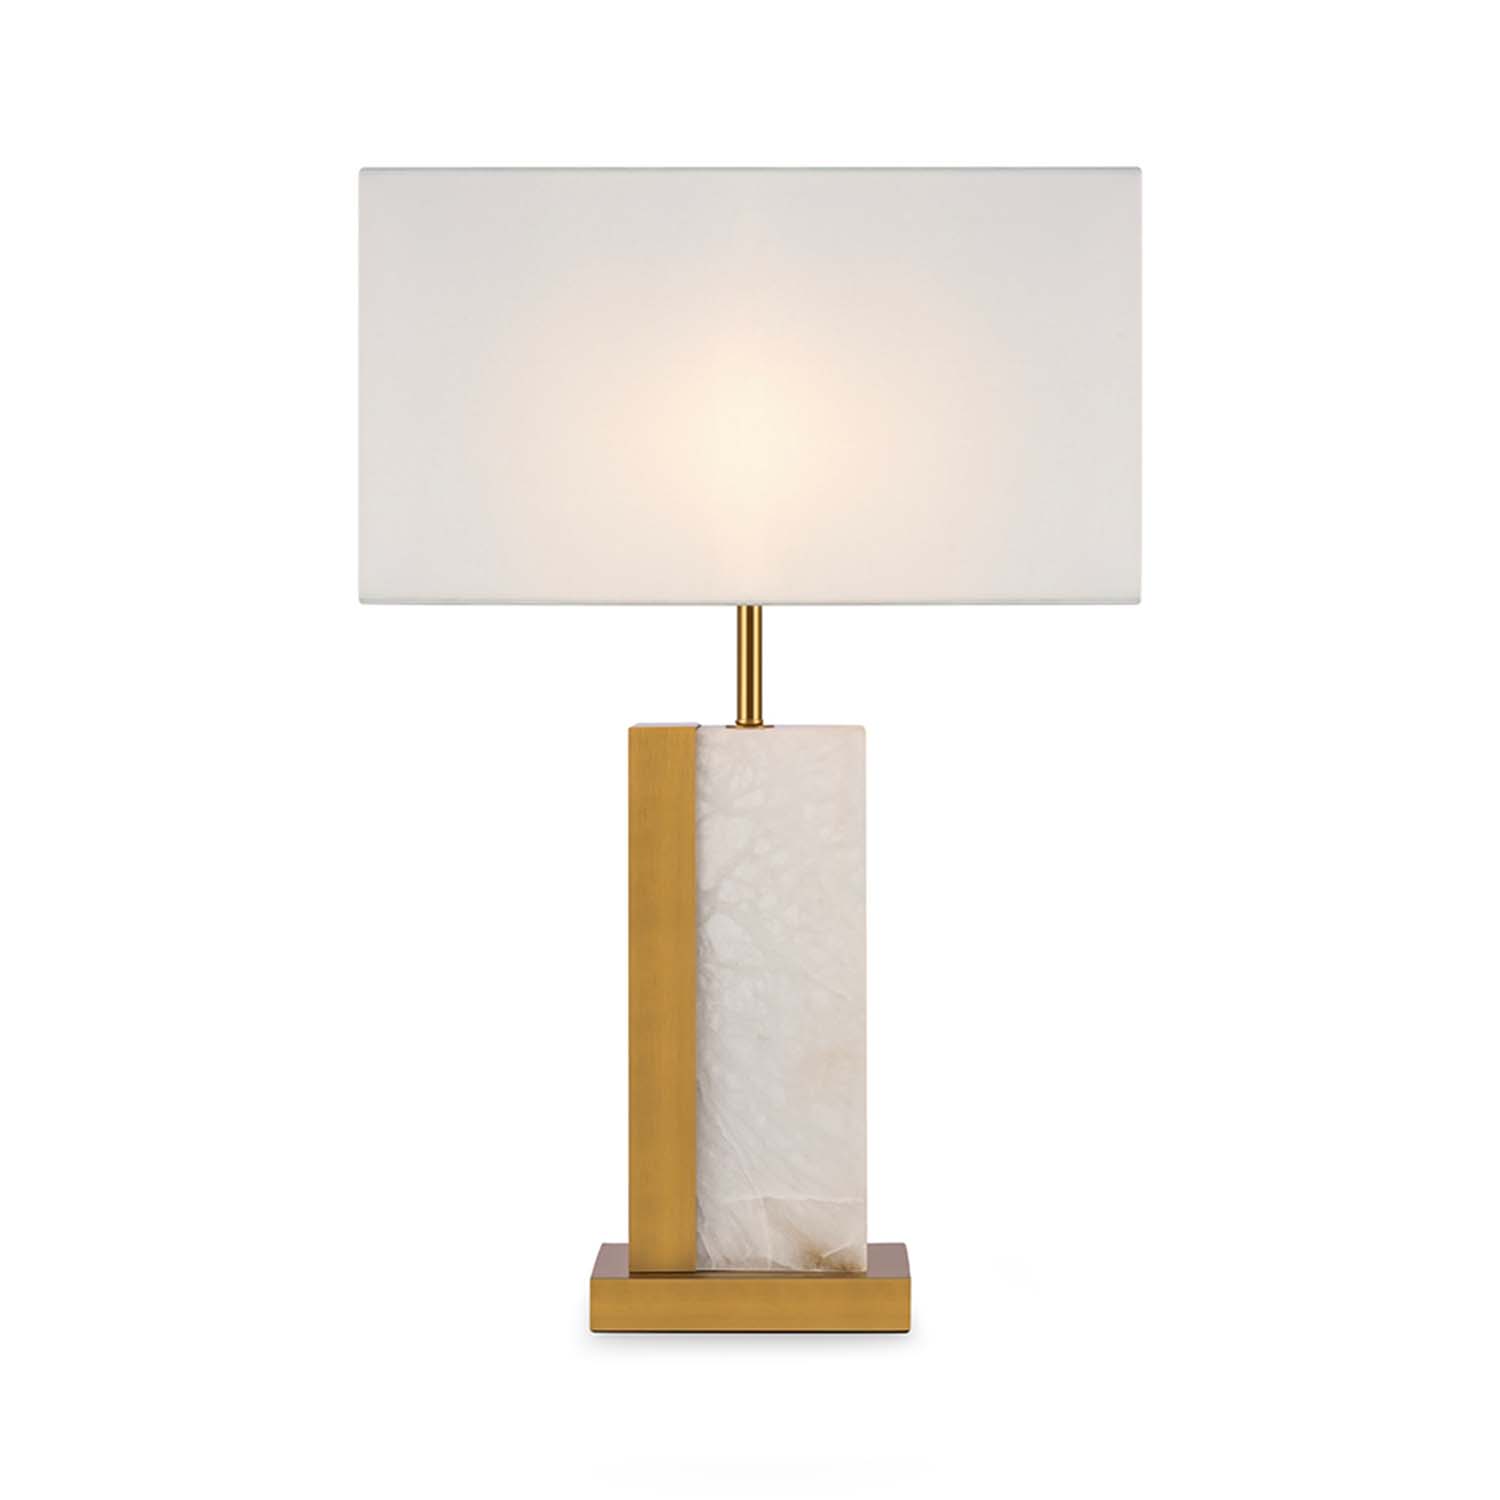 BIANCO - Hotel-style marble and brass bedside lamp